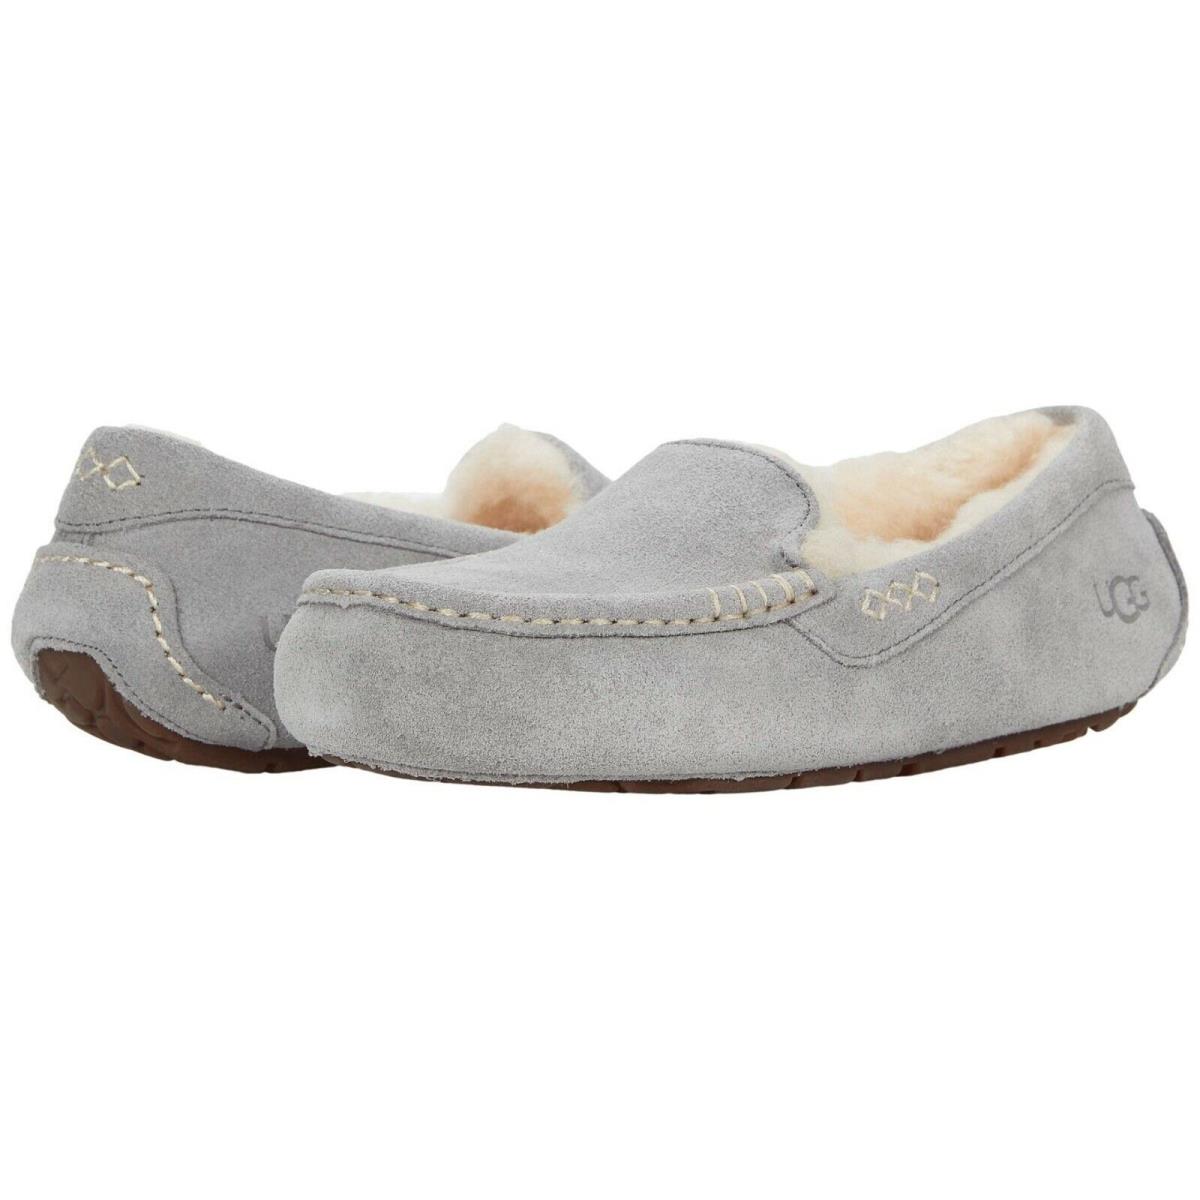 Women`s Shoes Ugg Ansley Wide Suede Moccasin Slippers 1106878 Light Grey